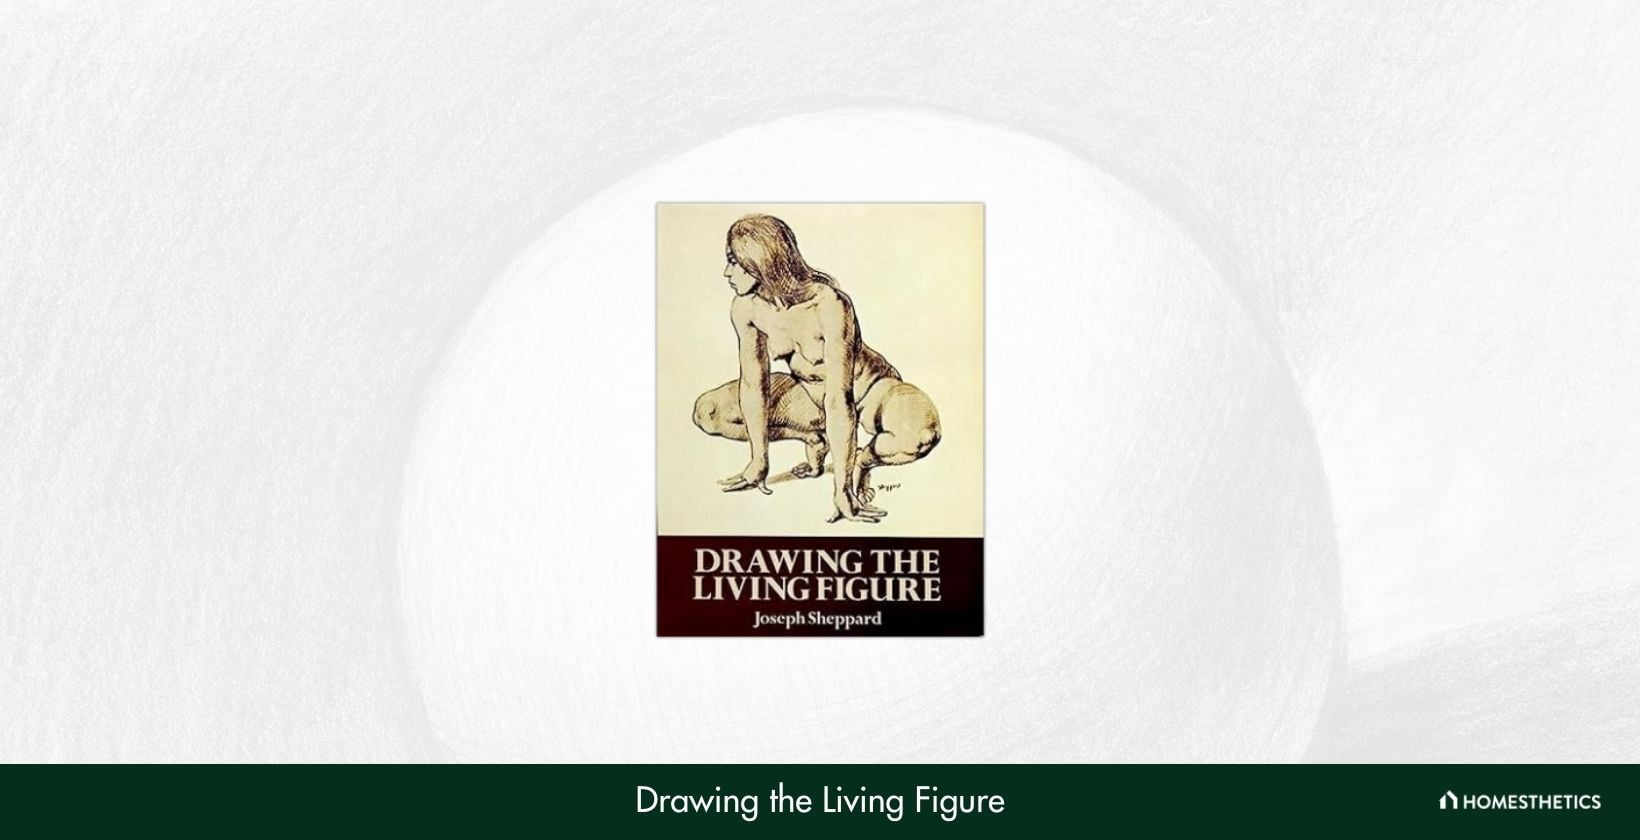 Drawing the Living Figure by Joseph Sheppard